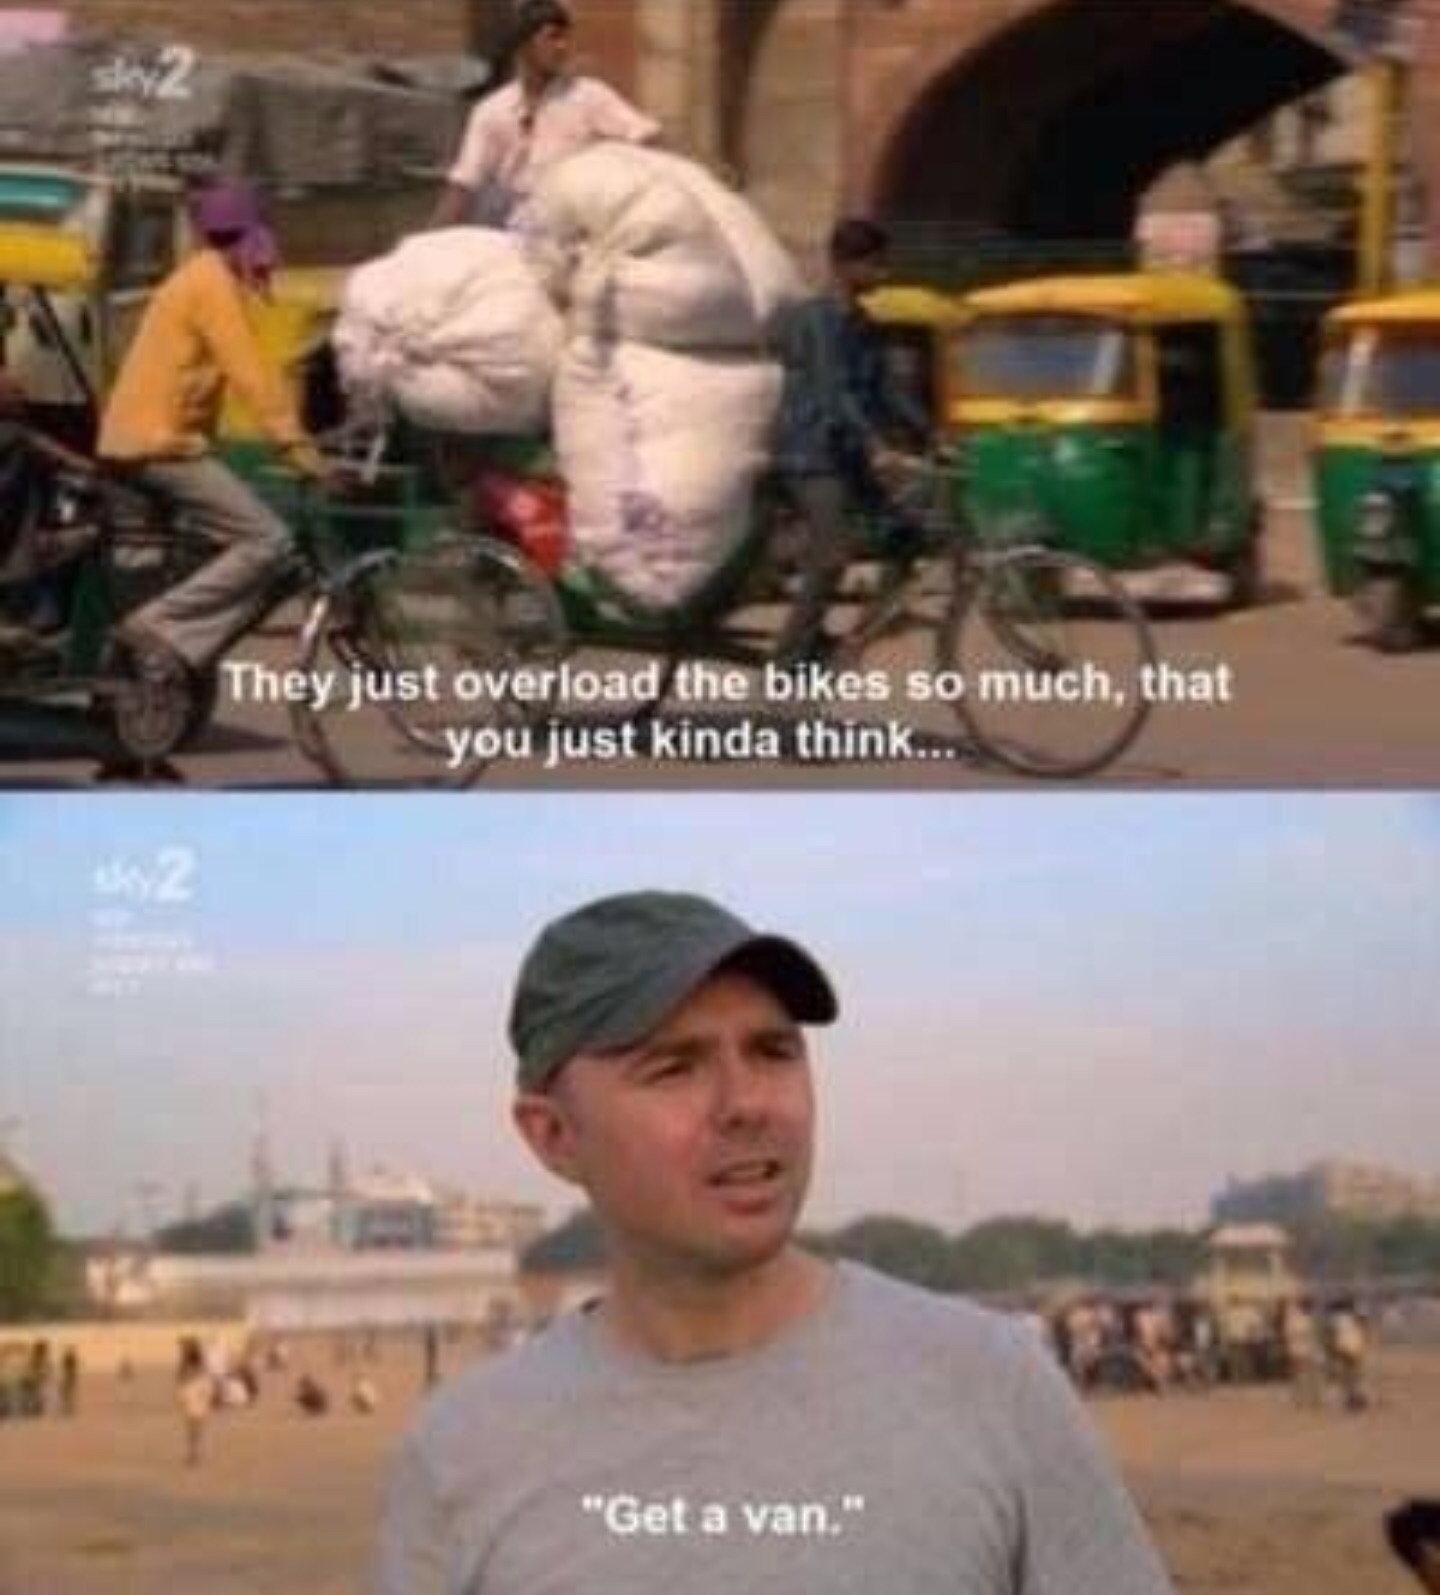 showerthoughts   - funny karl pilkington memes - They just overload the bikes so much, that you just kinda think... "Get a van."